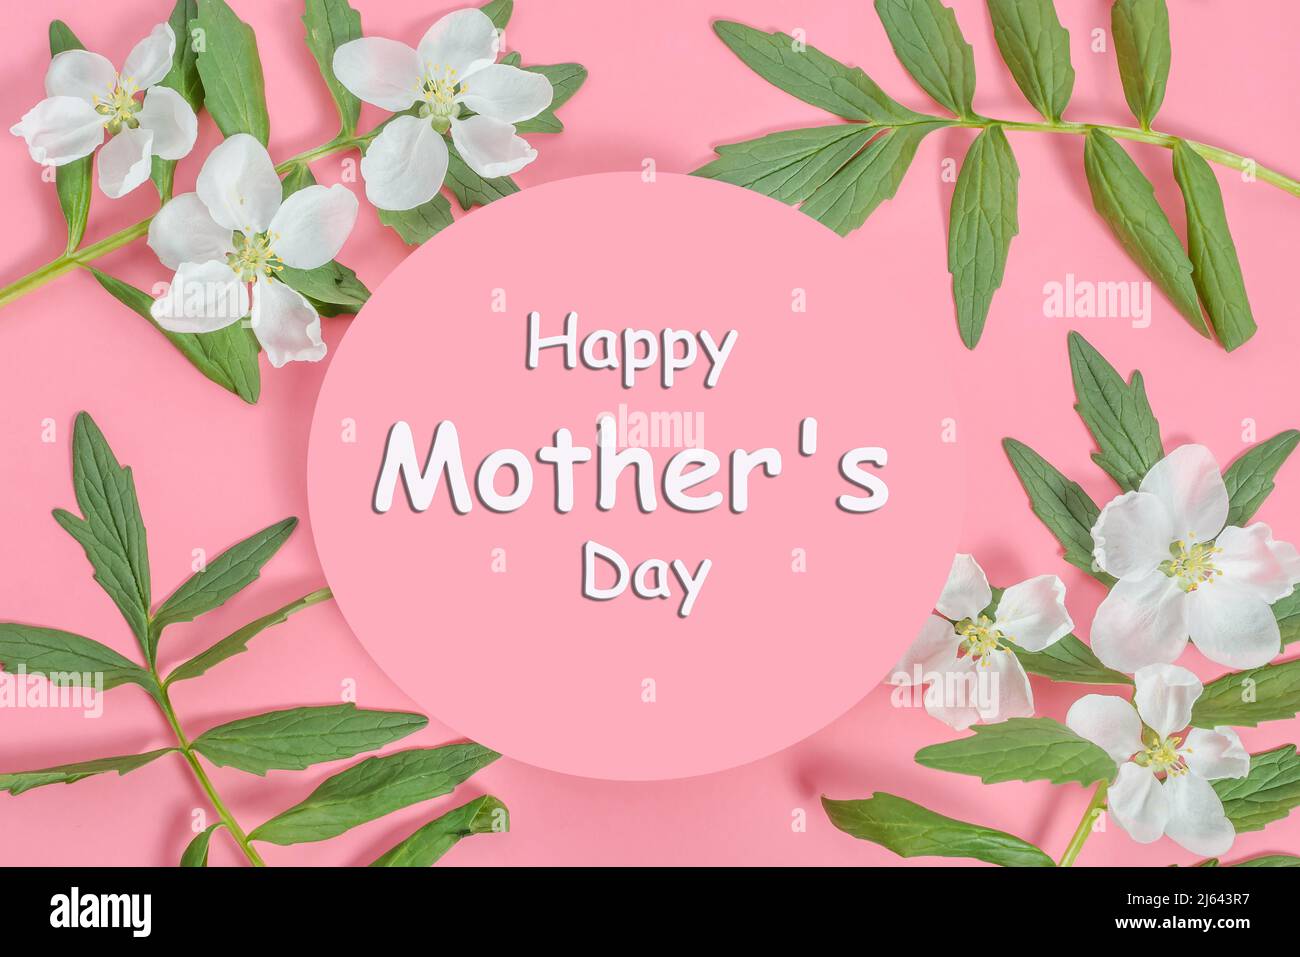 Happy Mother's Day lettering on a pink circle with a frame of ...